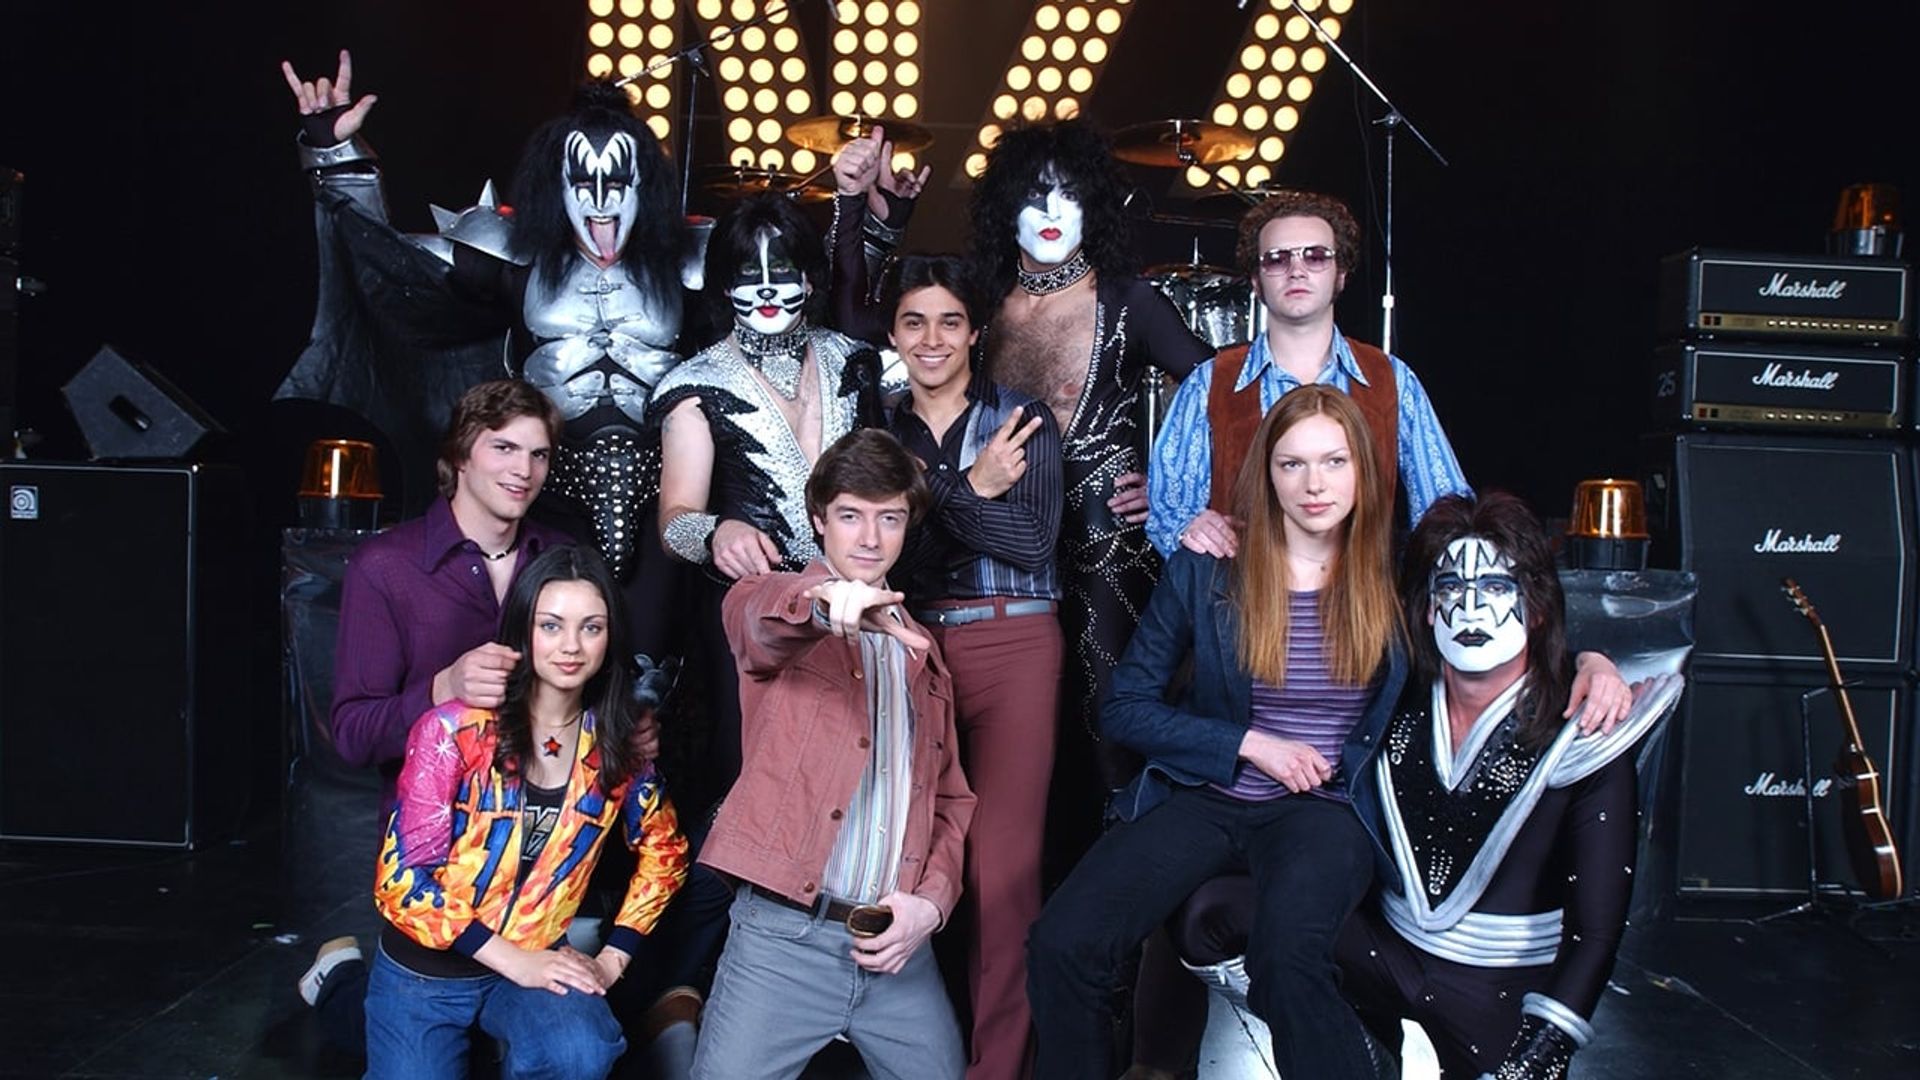 That '70s KISS Show background